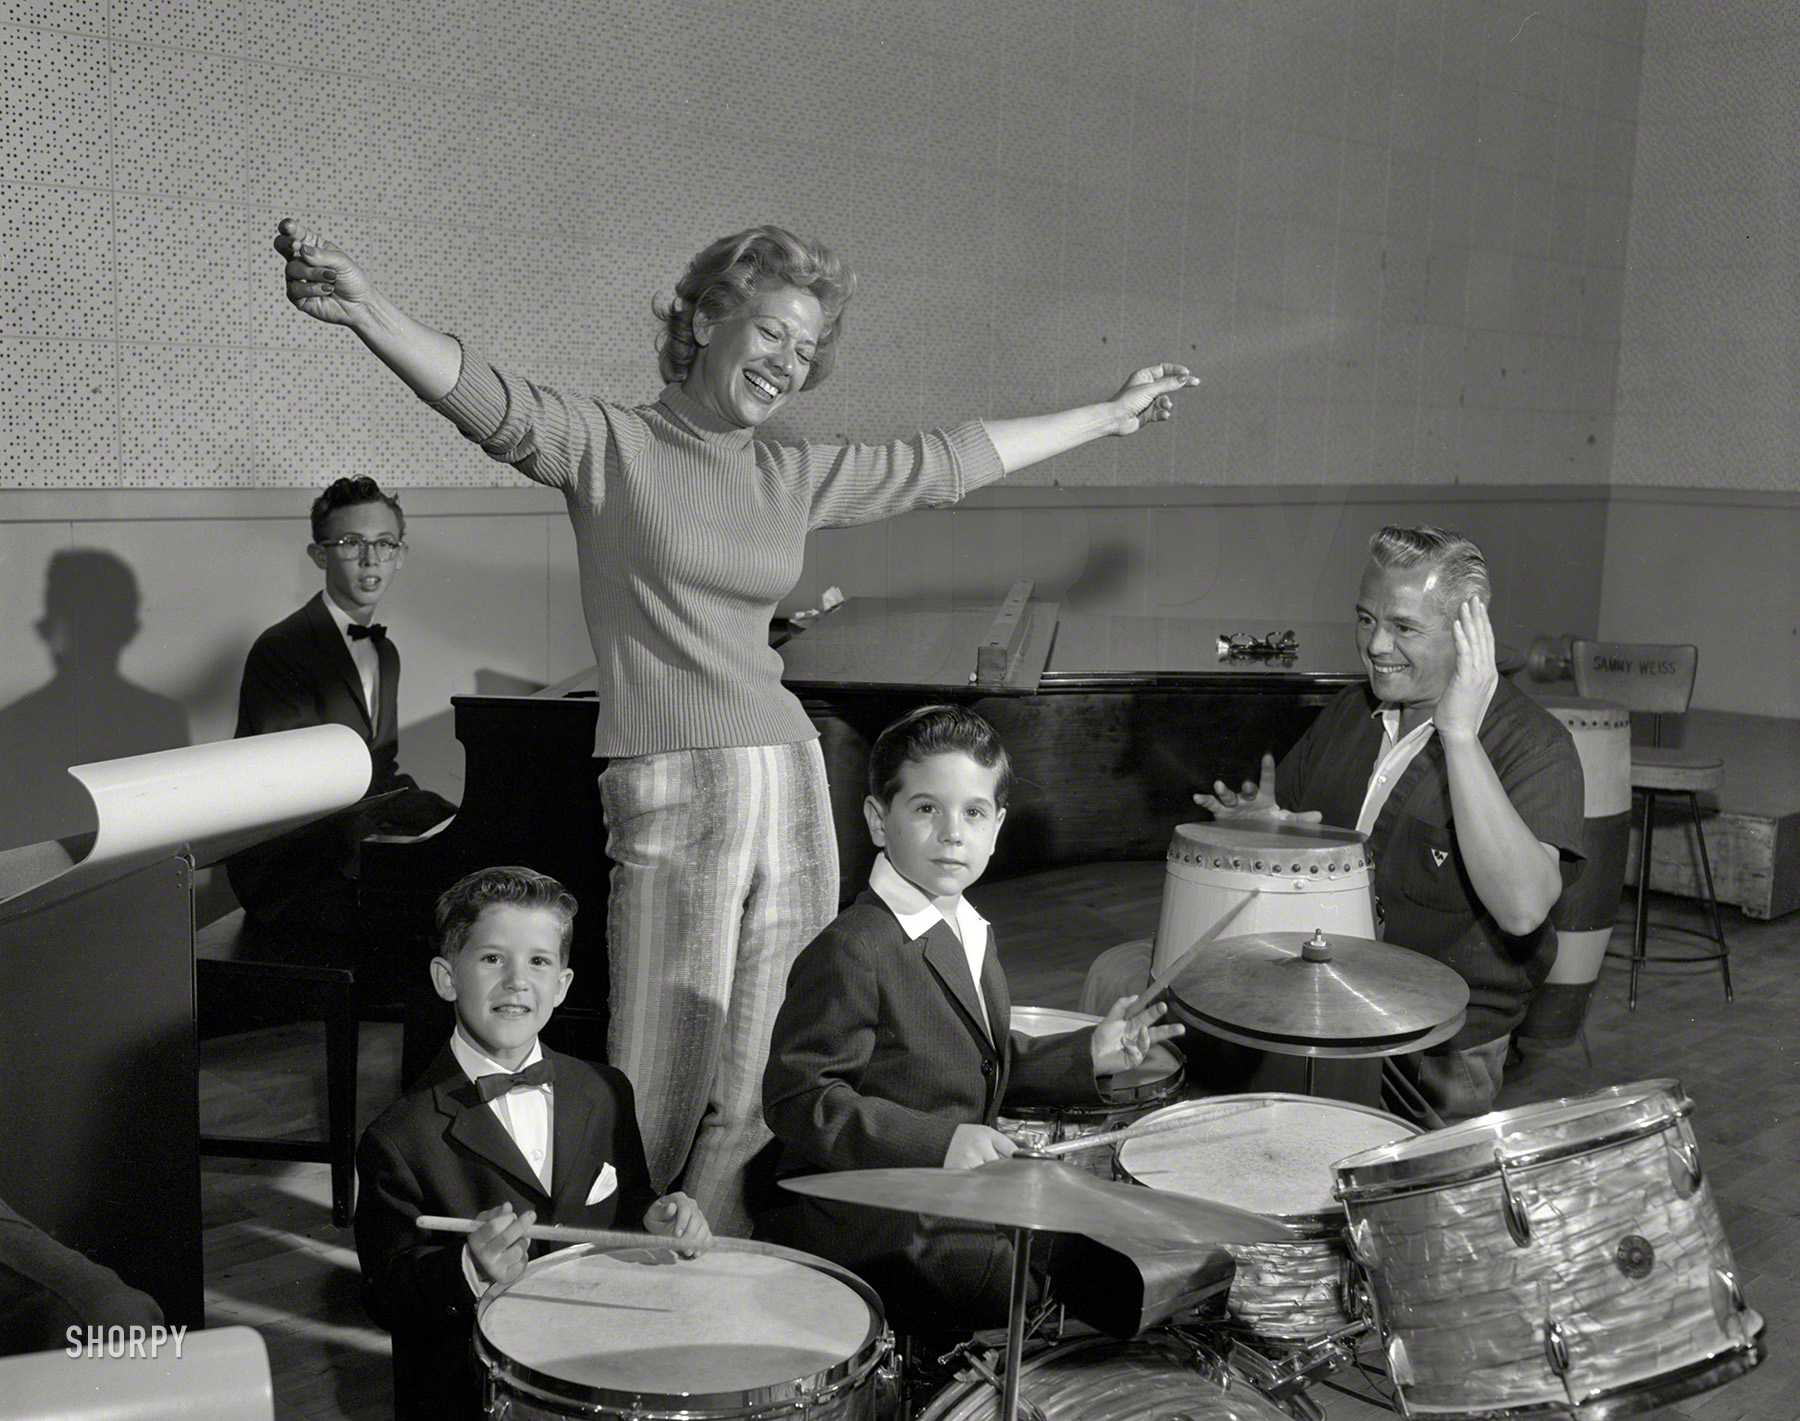 &nbsp; &nbsp; &nbsp; &nbsp; Sunday, April 3, 1960. 9 P.M. (NBC) -- Dinah Shore Show (60 min., Color). Guests are Betty Grable, Vic Damone, the Wiere Brothers and two youngsters -- Desi Arnaz IV and Richard Keith. The boys help form an all-child band.
Dinah Shore with Desi Arnaz, Desi Arnaz IV and Richard Keith on the set of her TV show in Los Angeles. 4x5 negative by Paul Bailey for NBC. View full size.